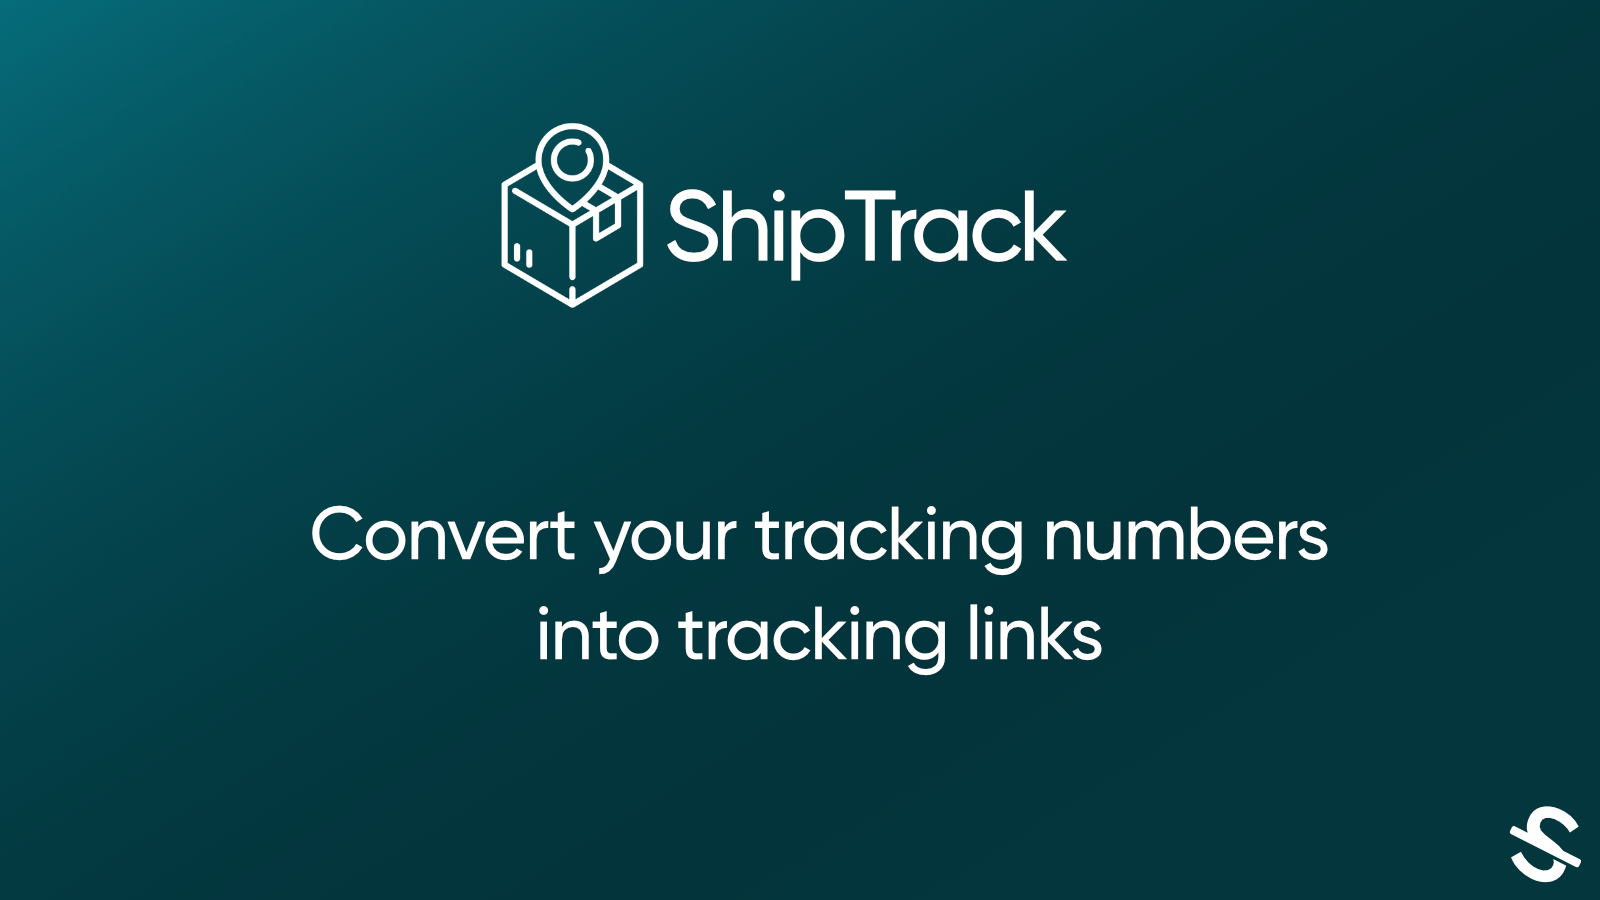 Convert your tracking numbers into tracking links